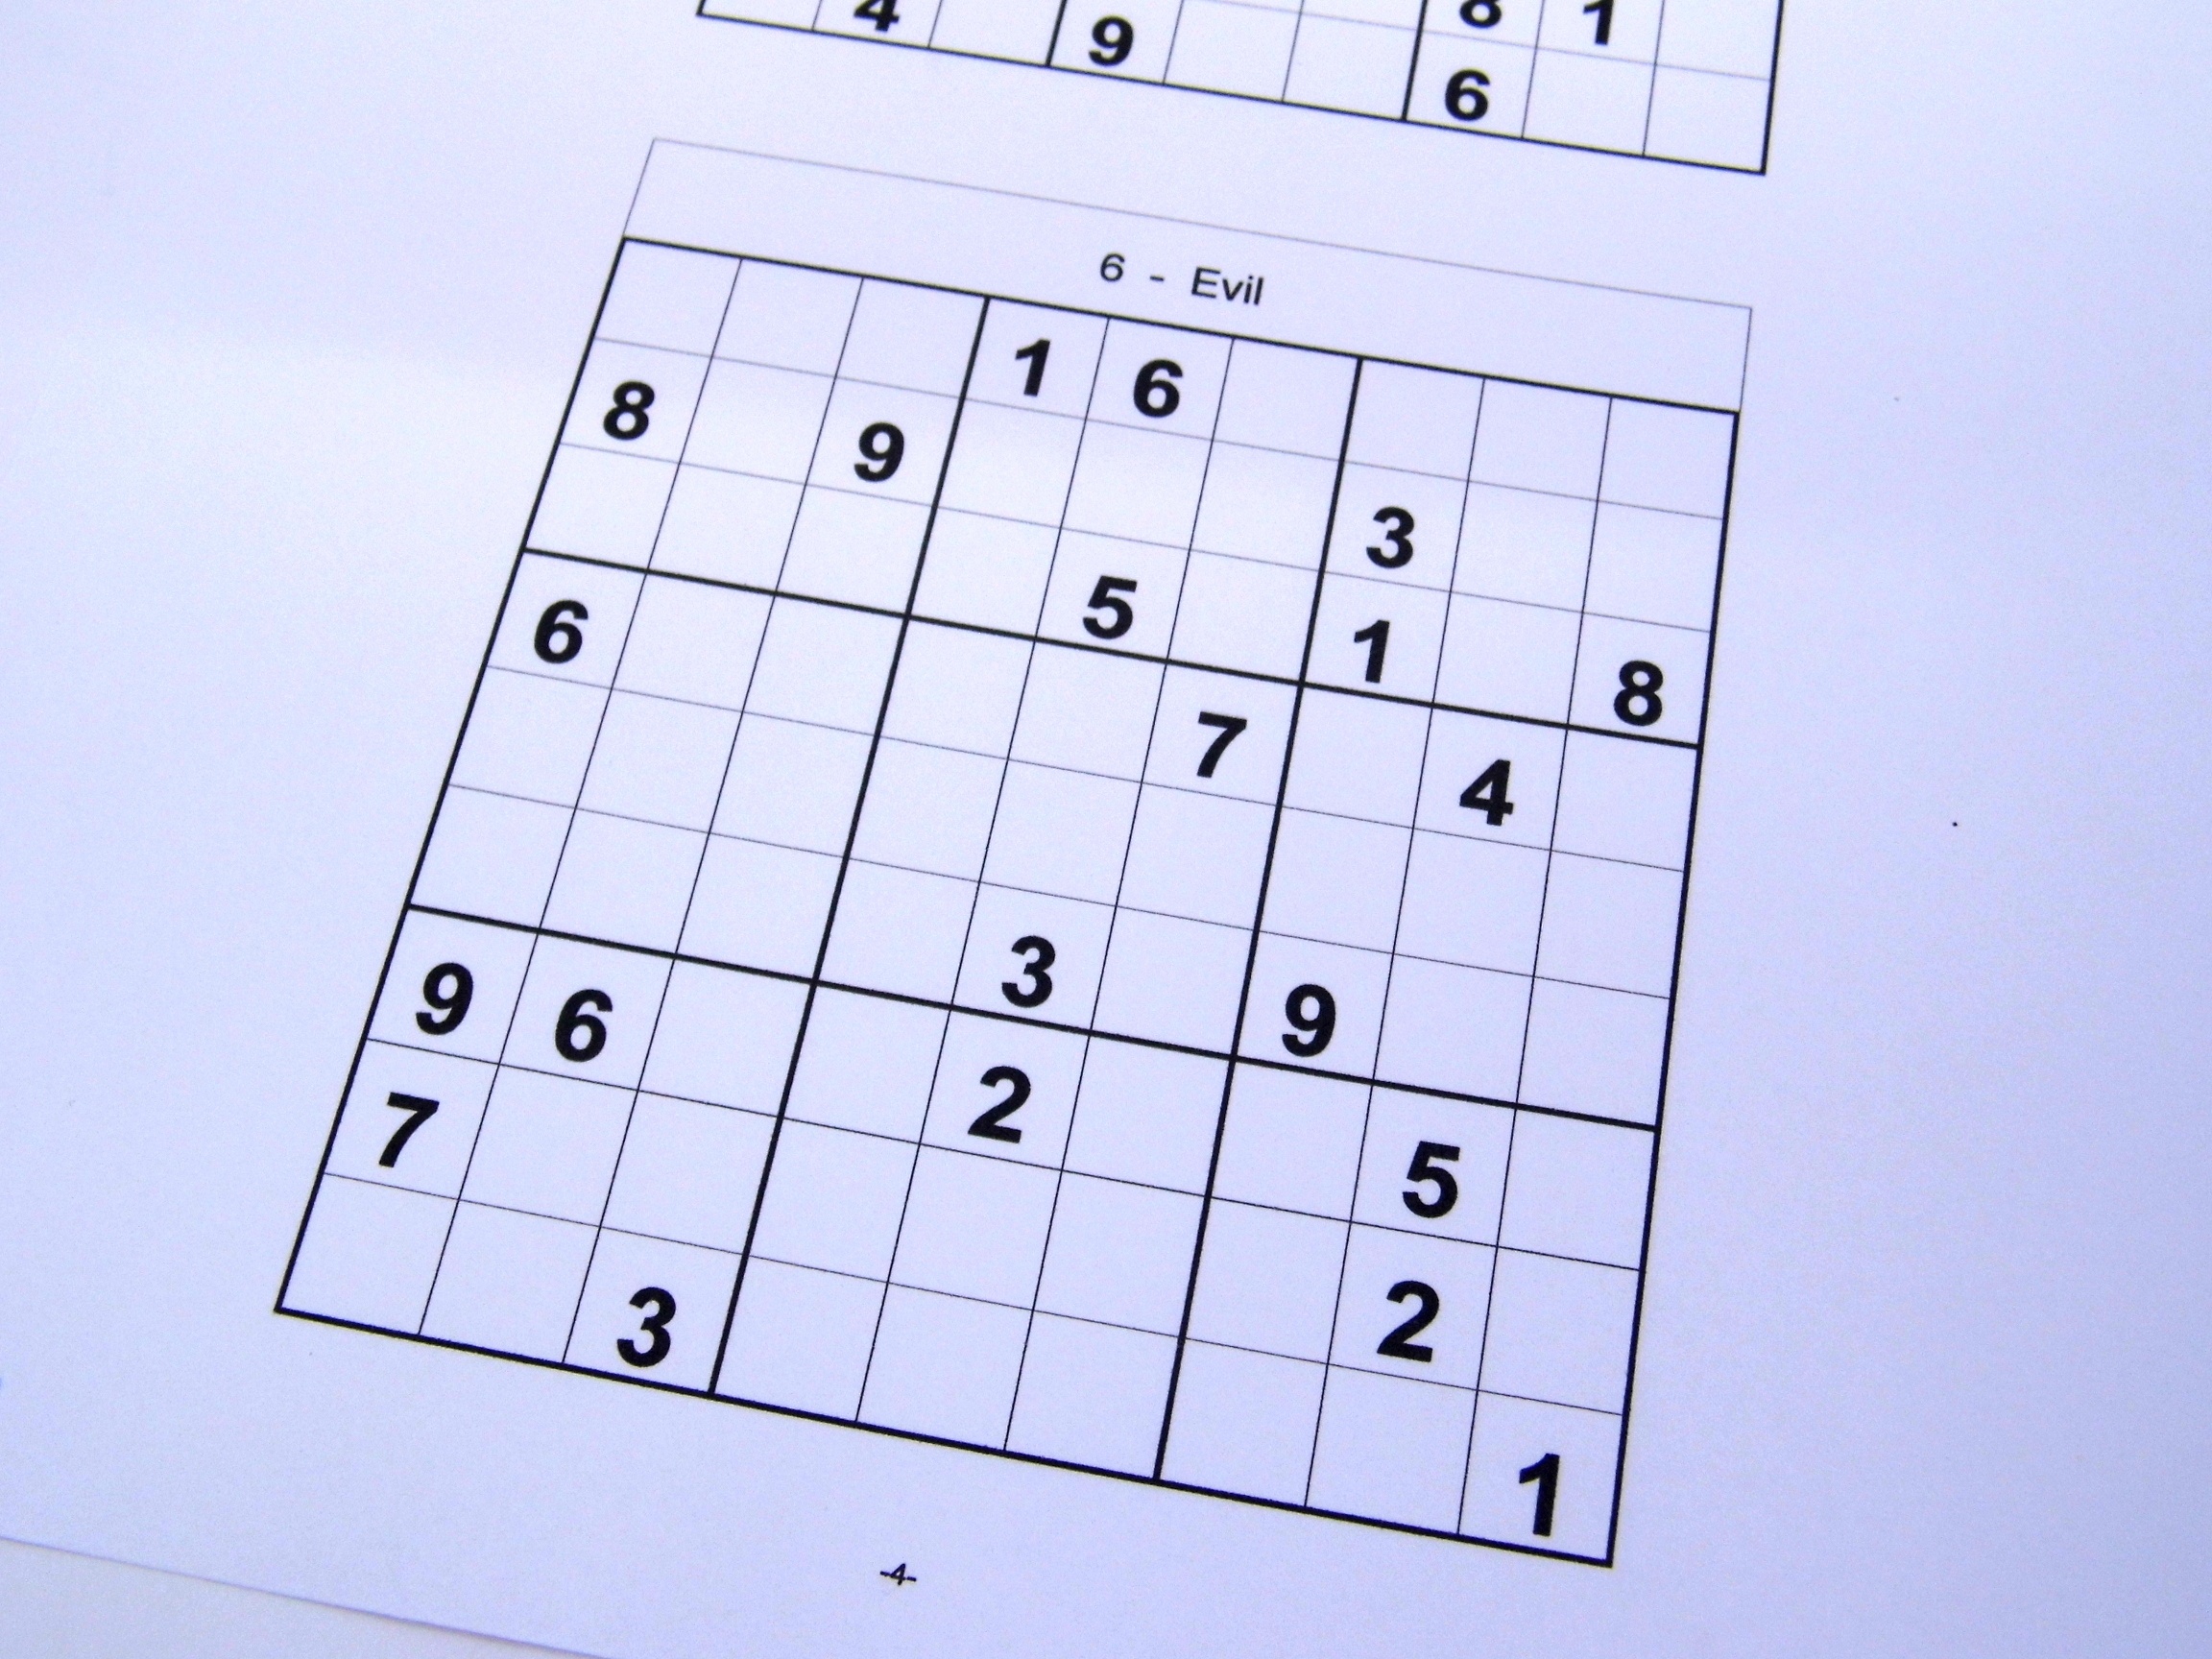 Free Sudoku Puzzles – Free Sudoku Puzzles From Easy To Evil Level - Download Printable Sudoku Puzzles Free